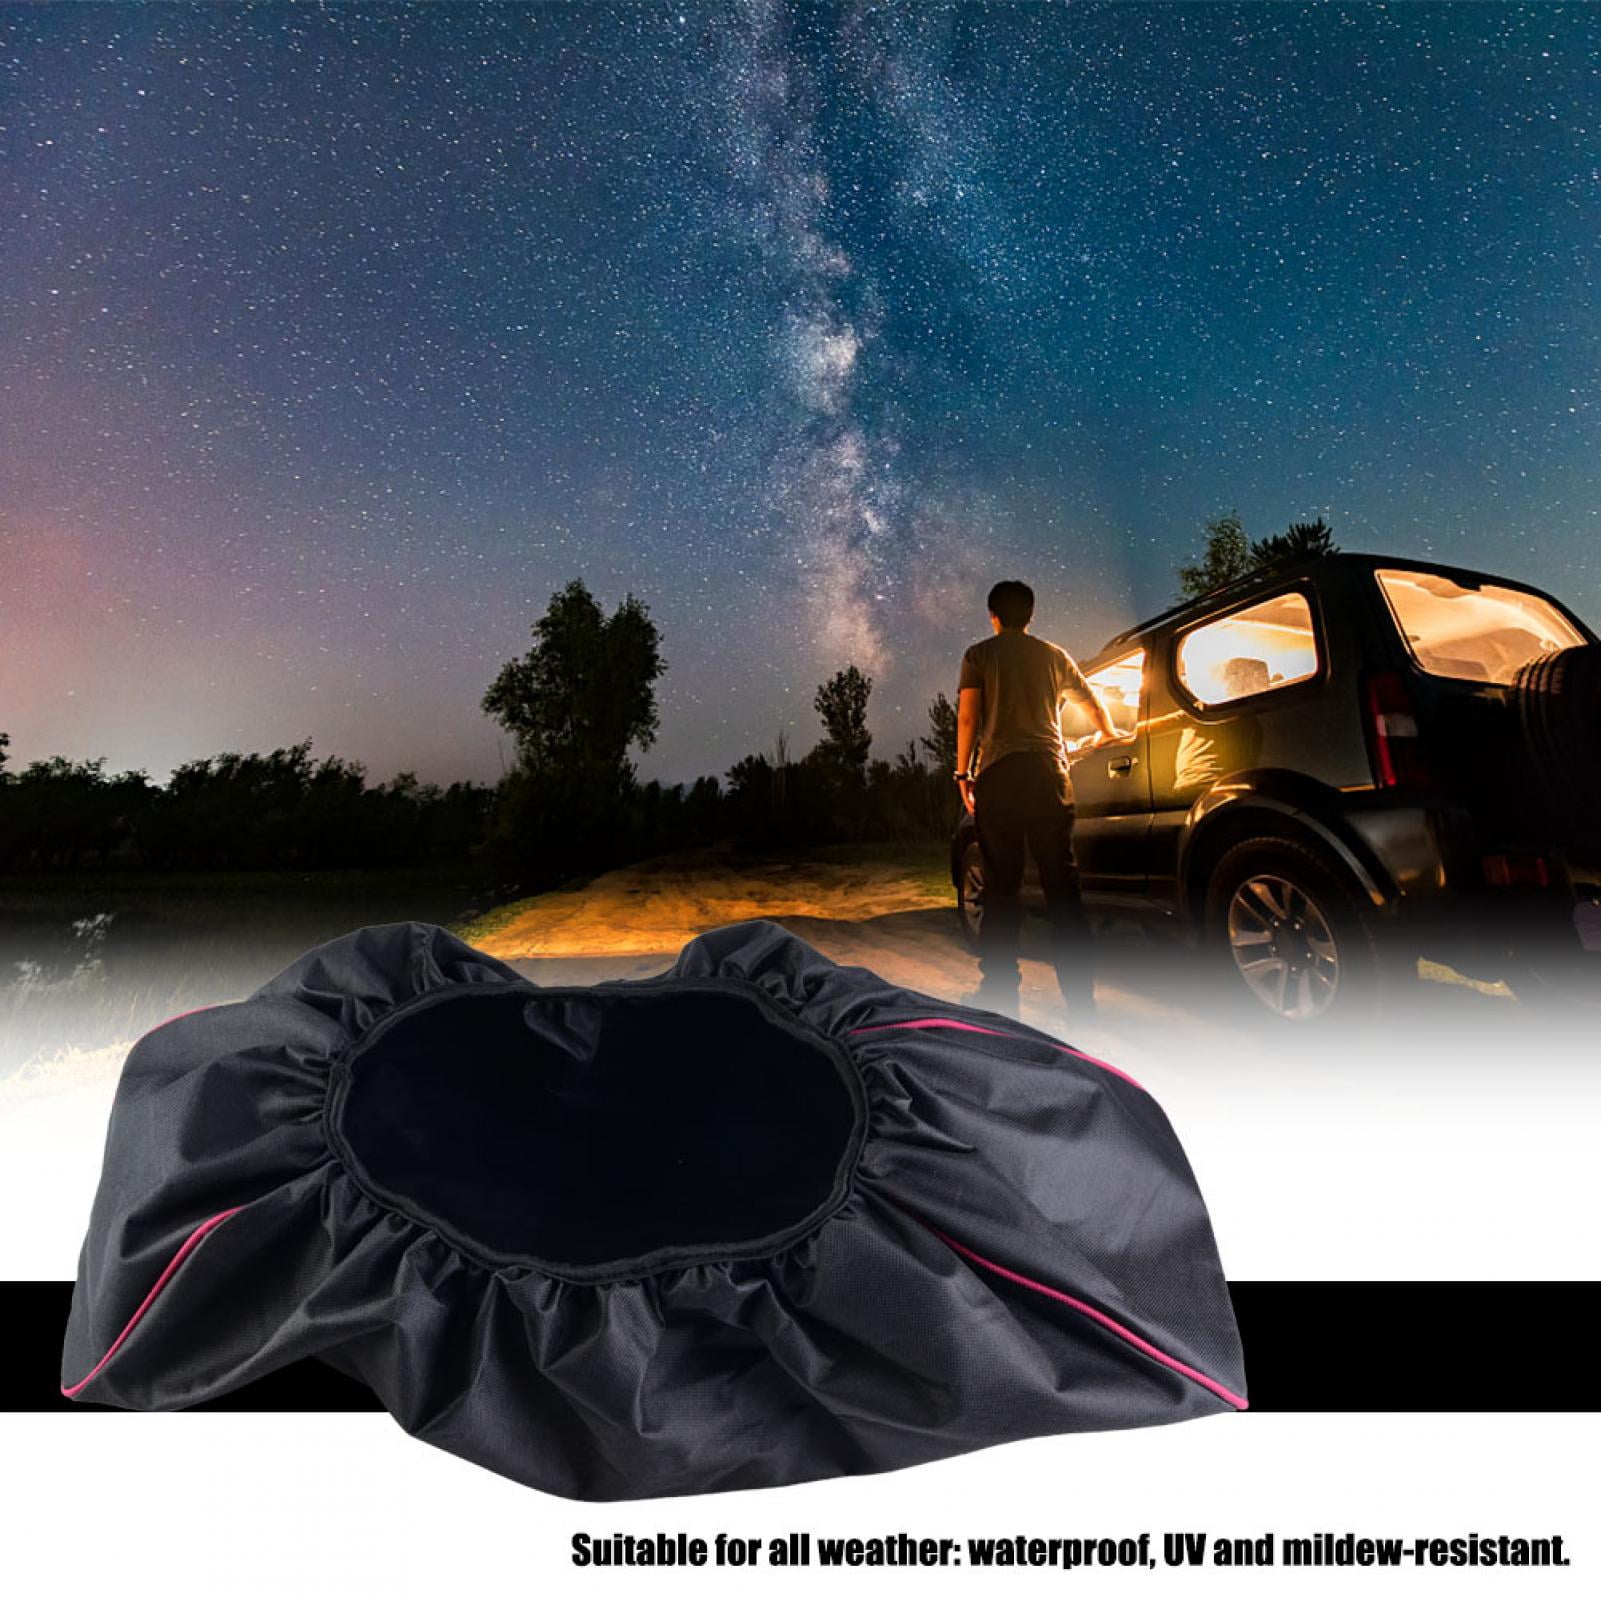 Bediffer Winch Cover Oxford Cloth 8,000-17,500 lbs Capacity Trailer SUVs Black Waterproof Anti-dust Soft for All Weather